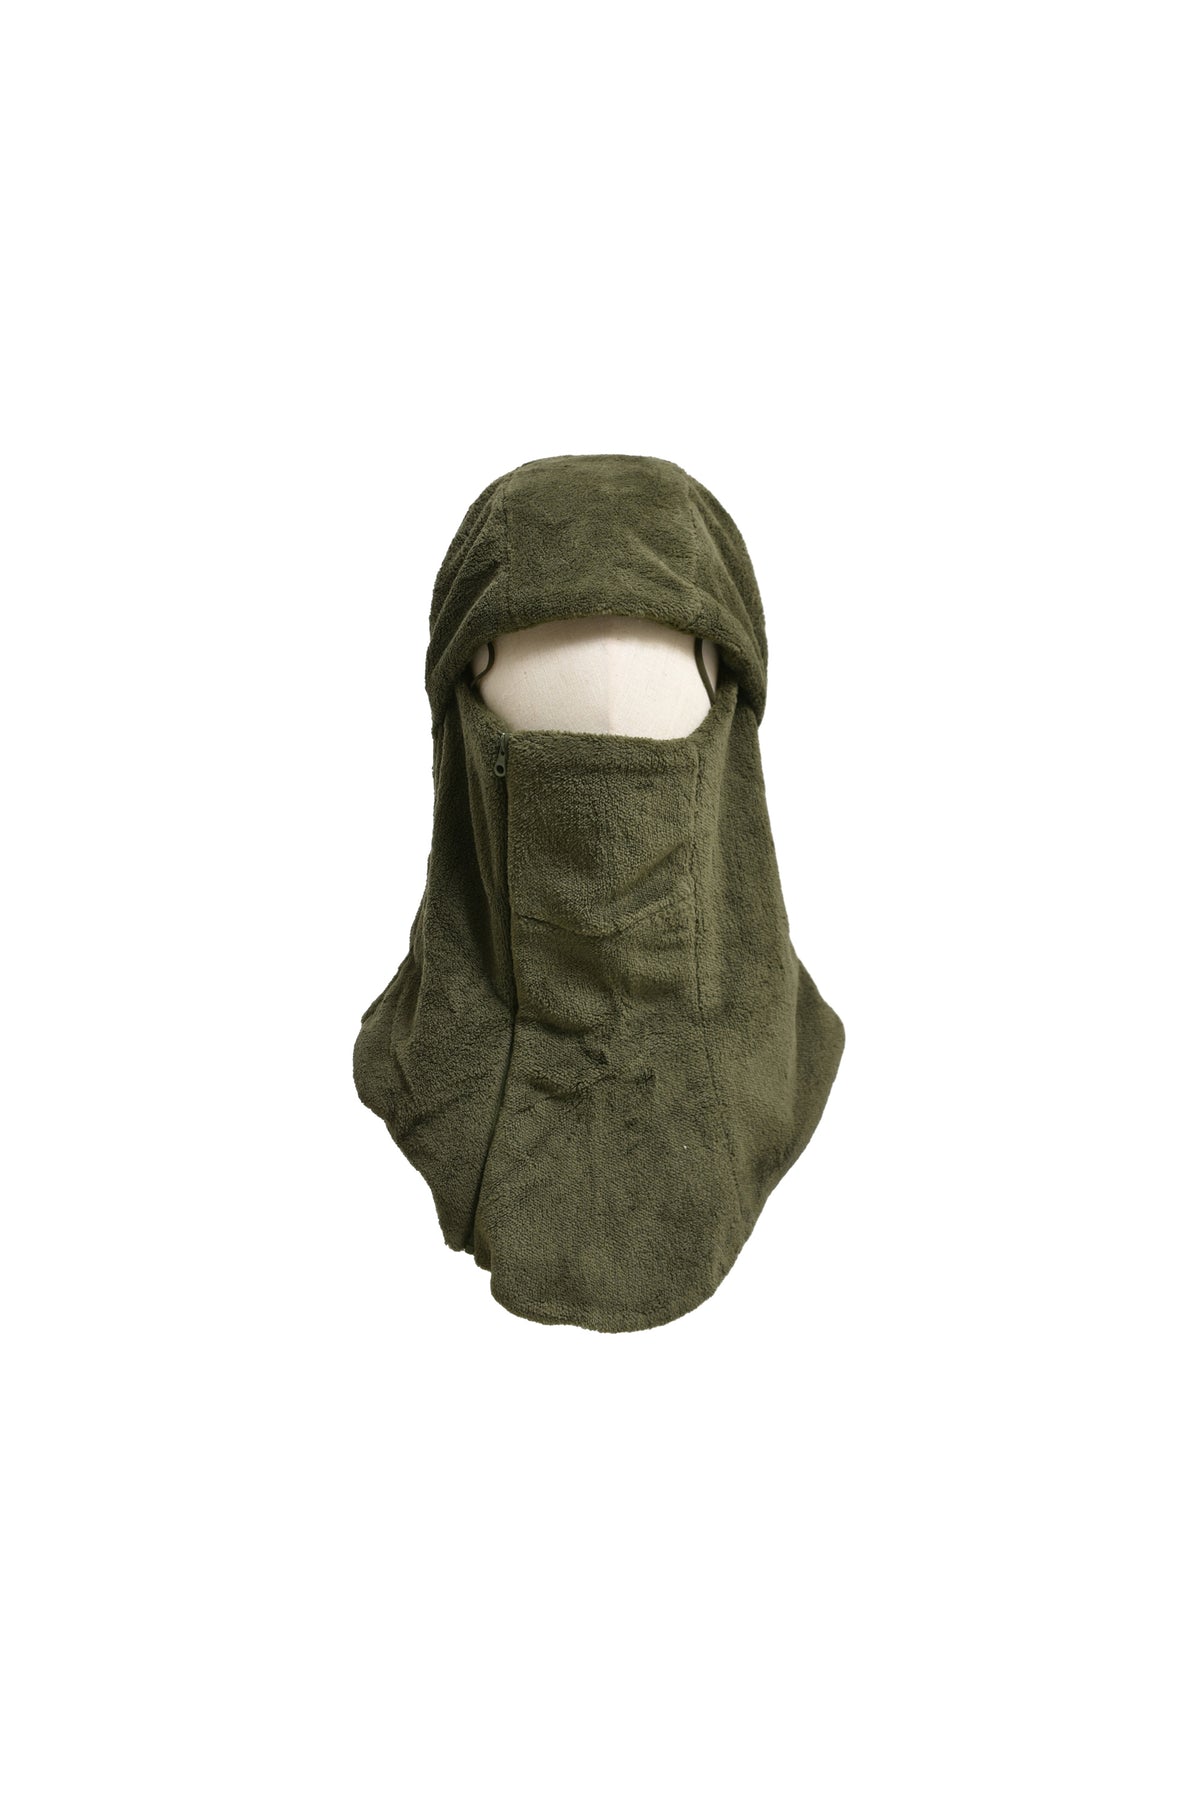 POST ARCHIVE FACTION (PAF) 5.1 BALACLAVA RIGHT / OLIVE GRN